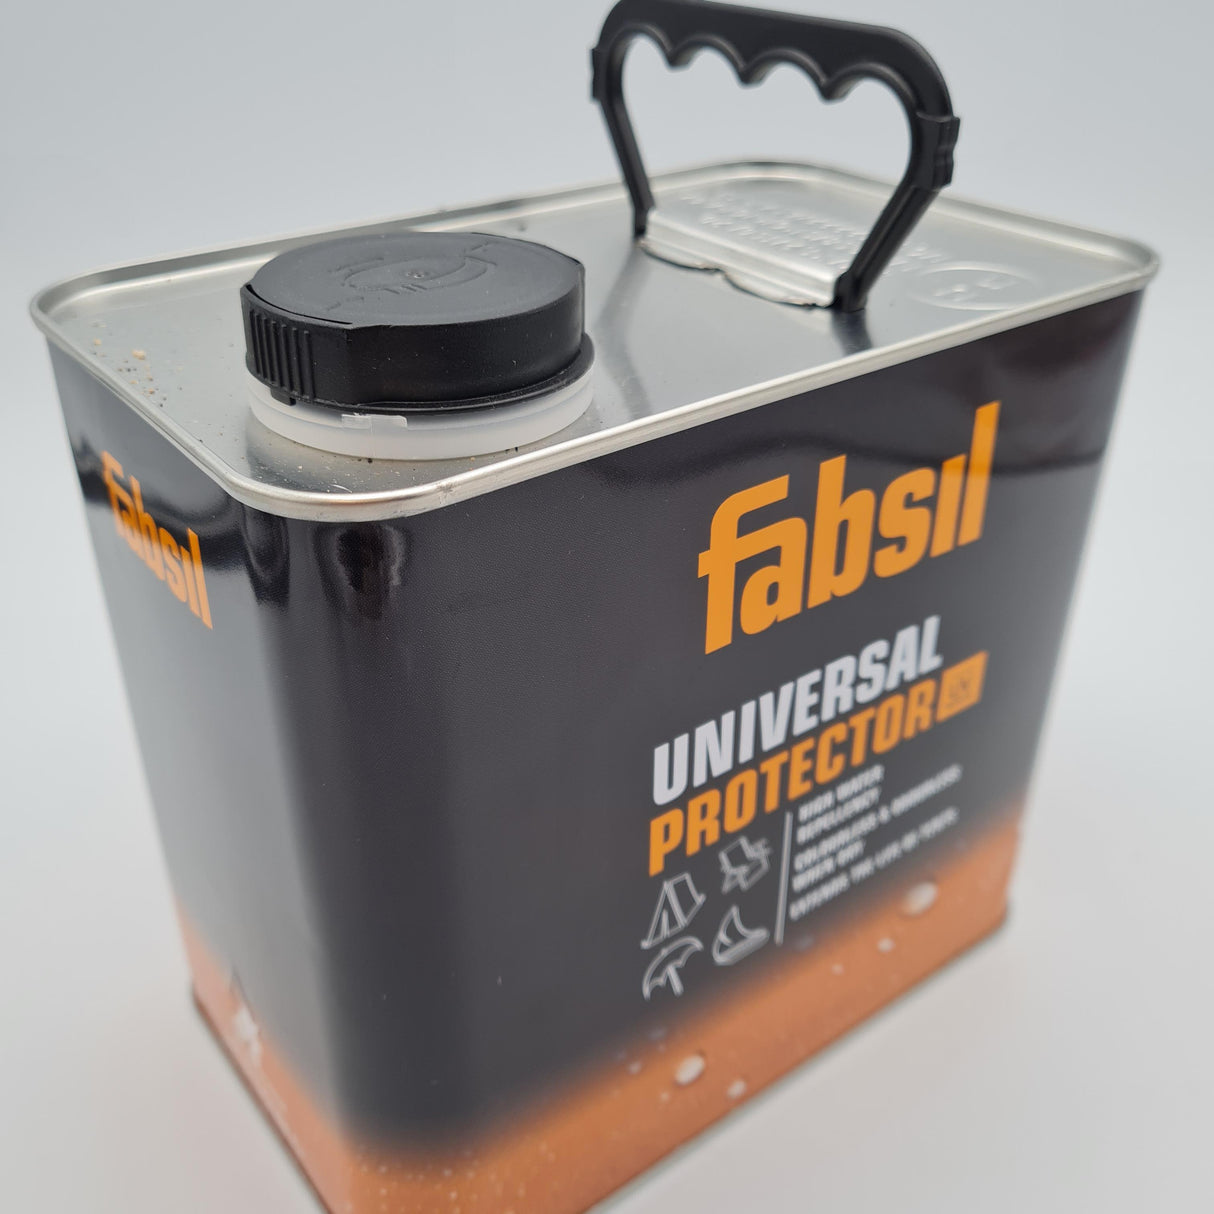 Fabsil UV 2.5 Litre - Tent,Canopies, Awning Waterproofer Sealant - KK1293 - COLLECTION ONLY.